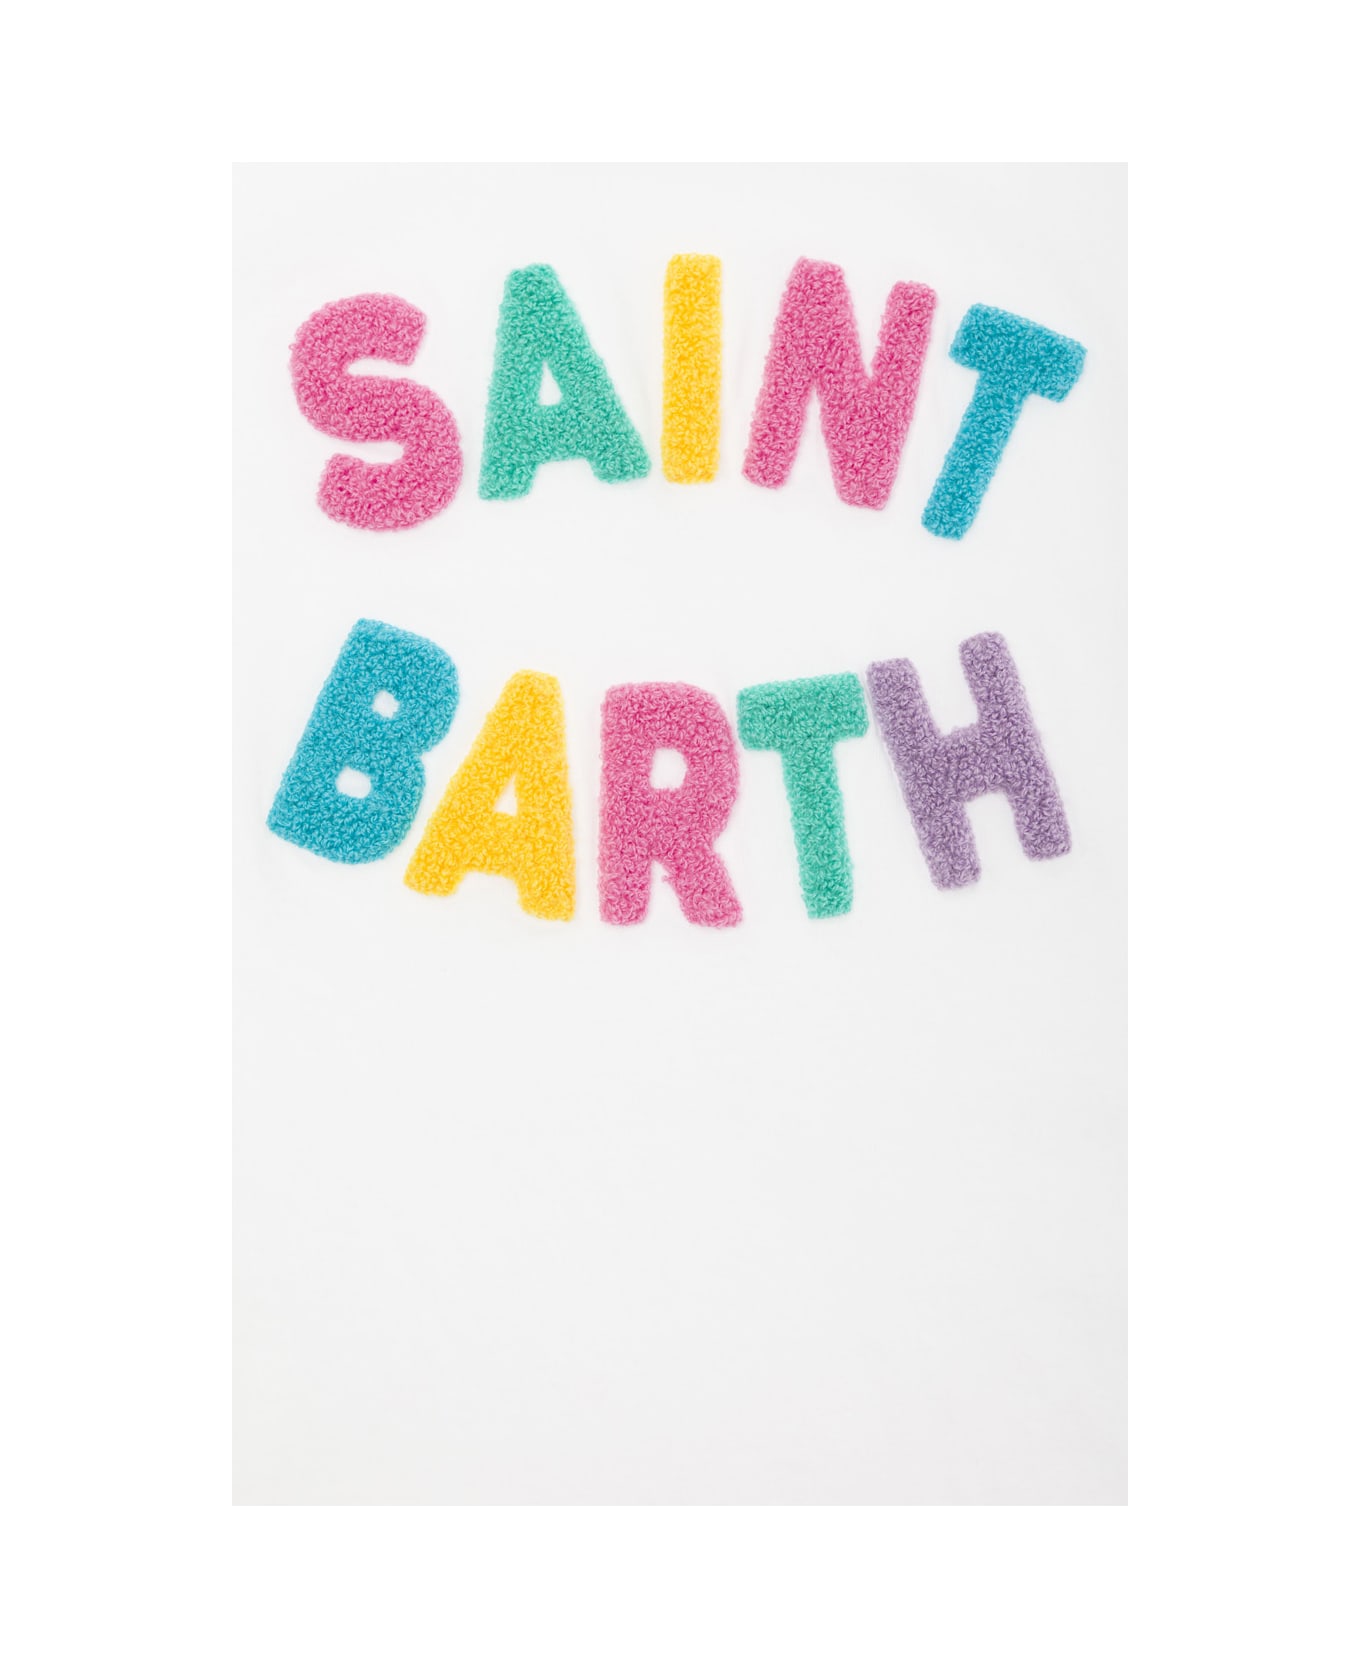 MC2 Saint Barth White T-shirt With Multicolor Logo Patches In Jersey Baby - White Tシャツ＆ポロシャツ